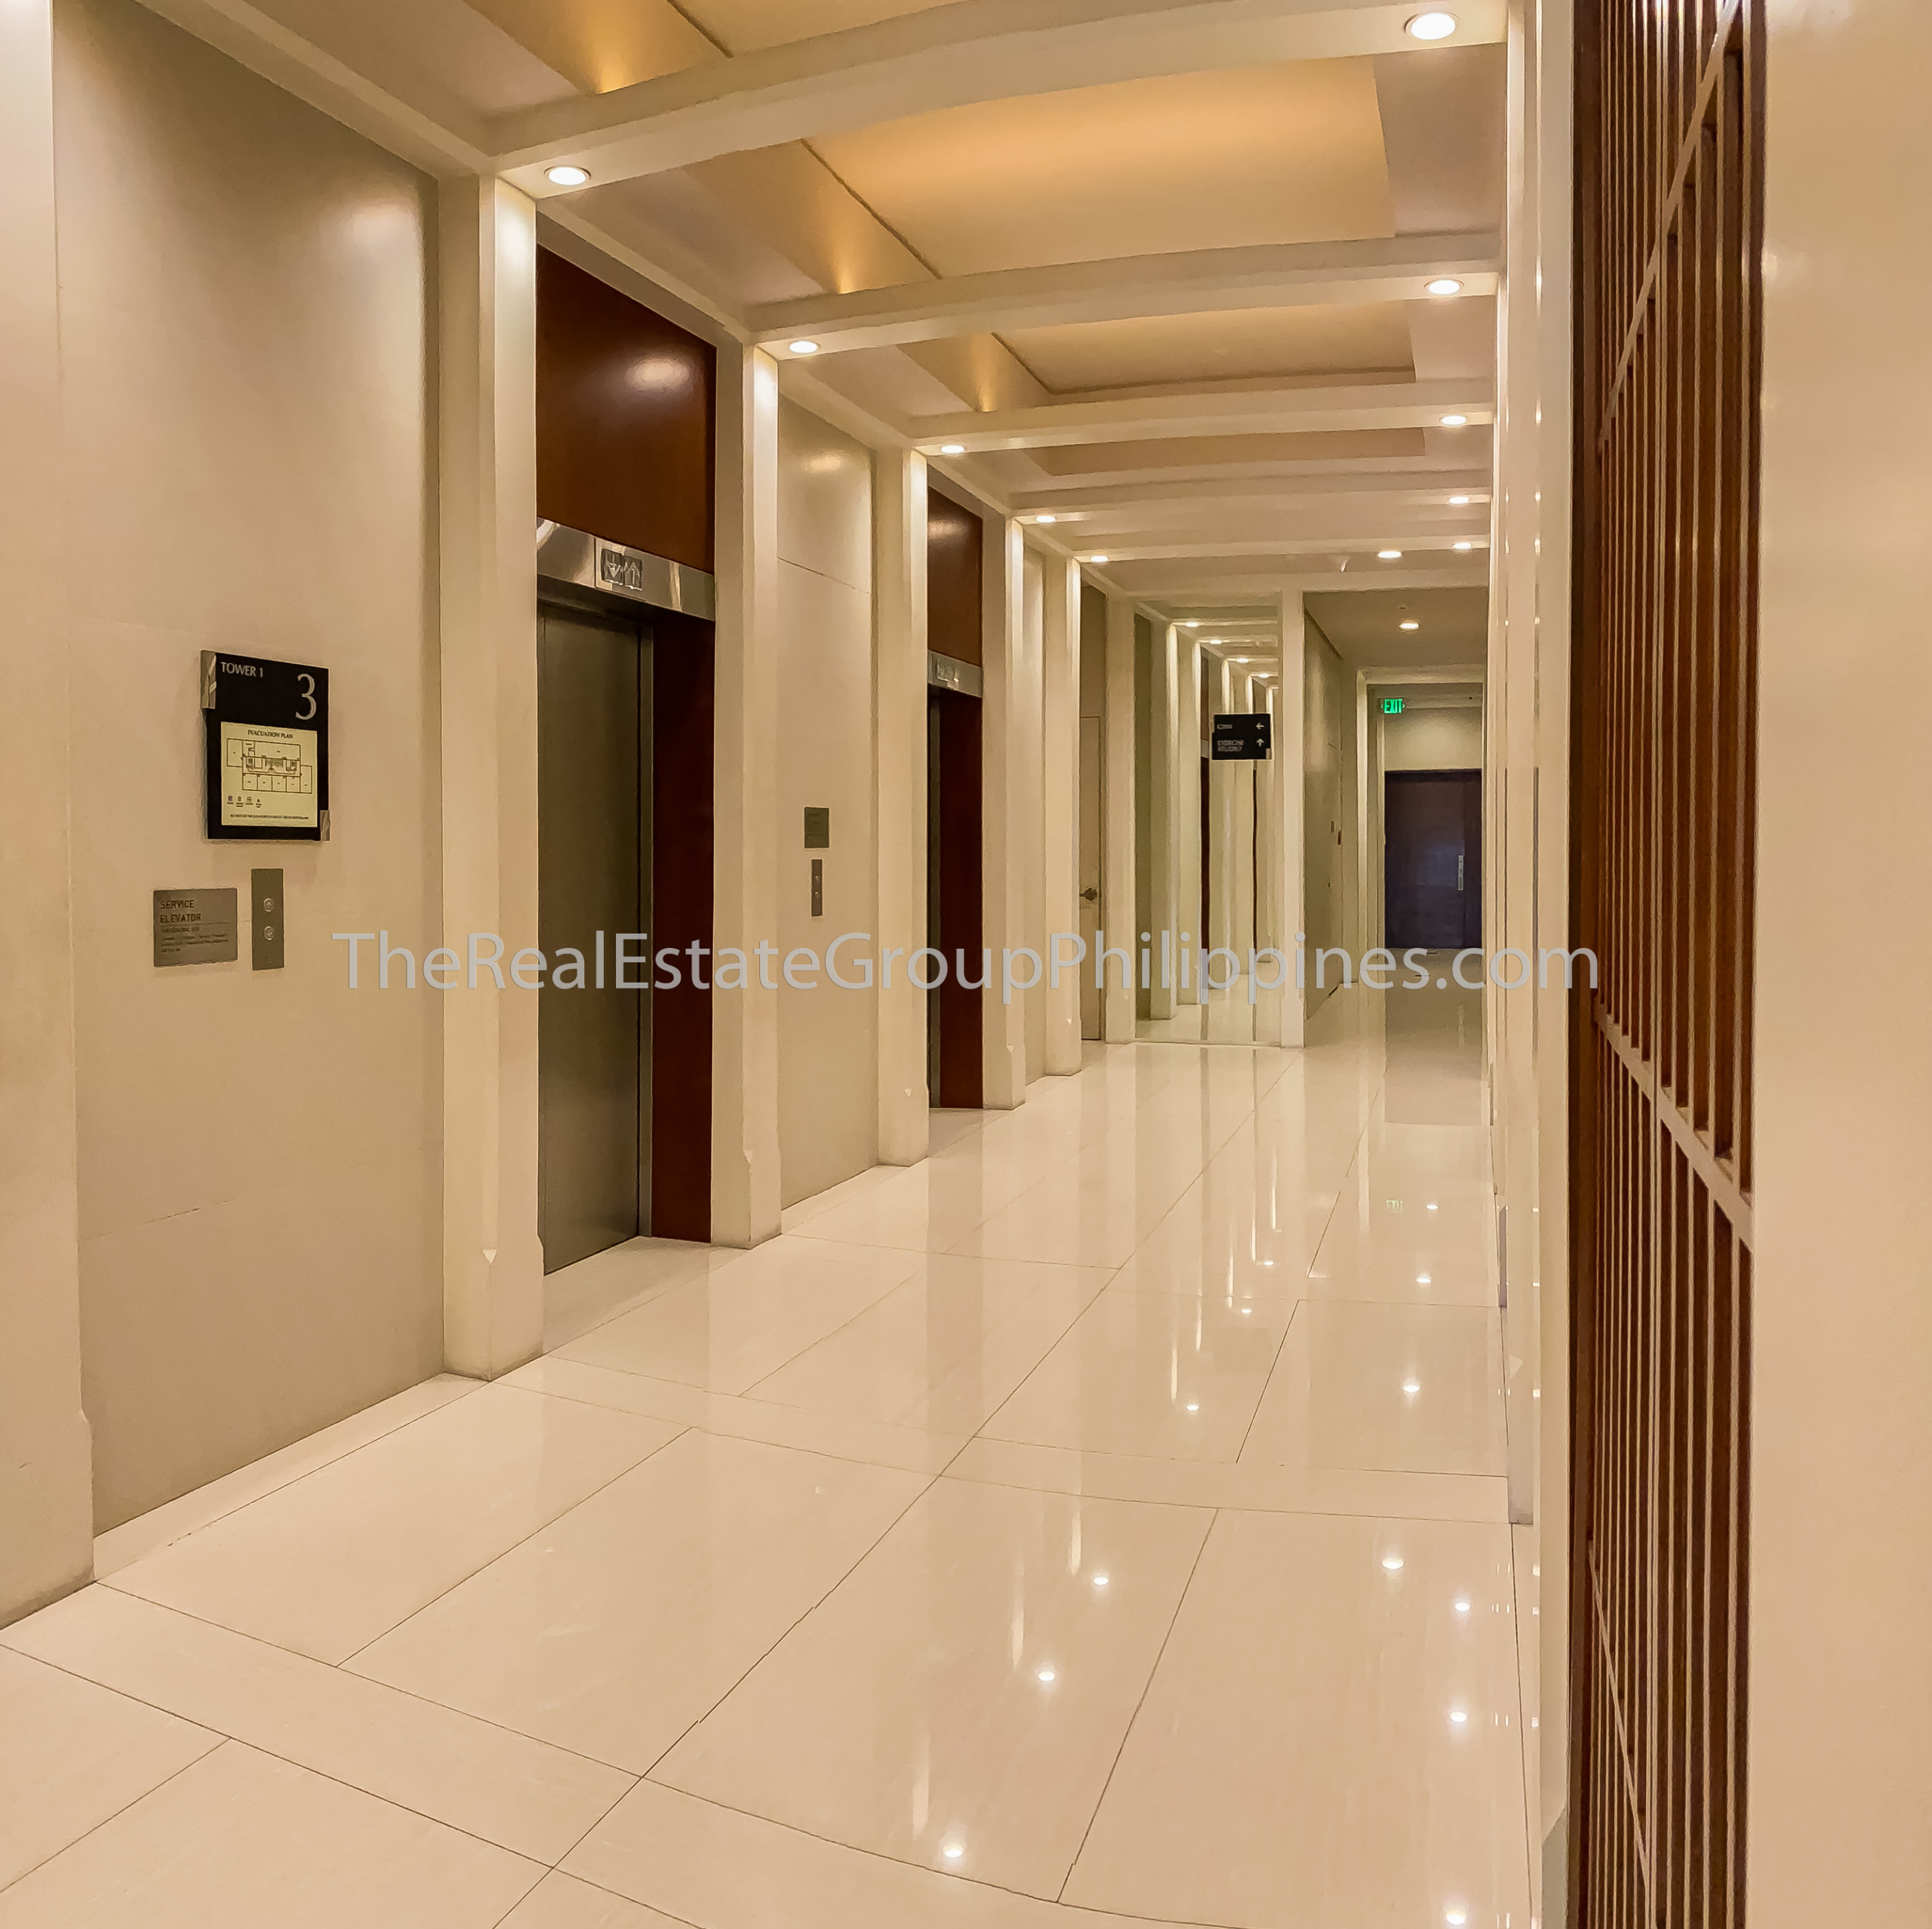 1BR Condo For Rent, Arya Residences, Tower 1, BGC - ₱75K Per Month-1